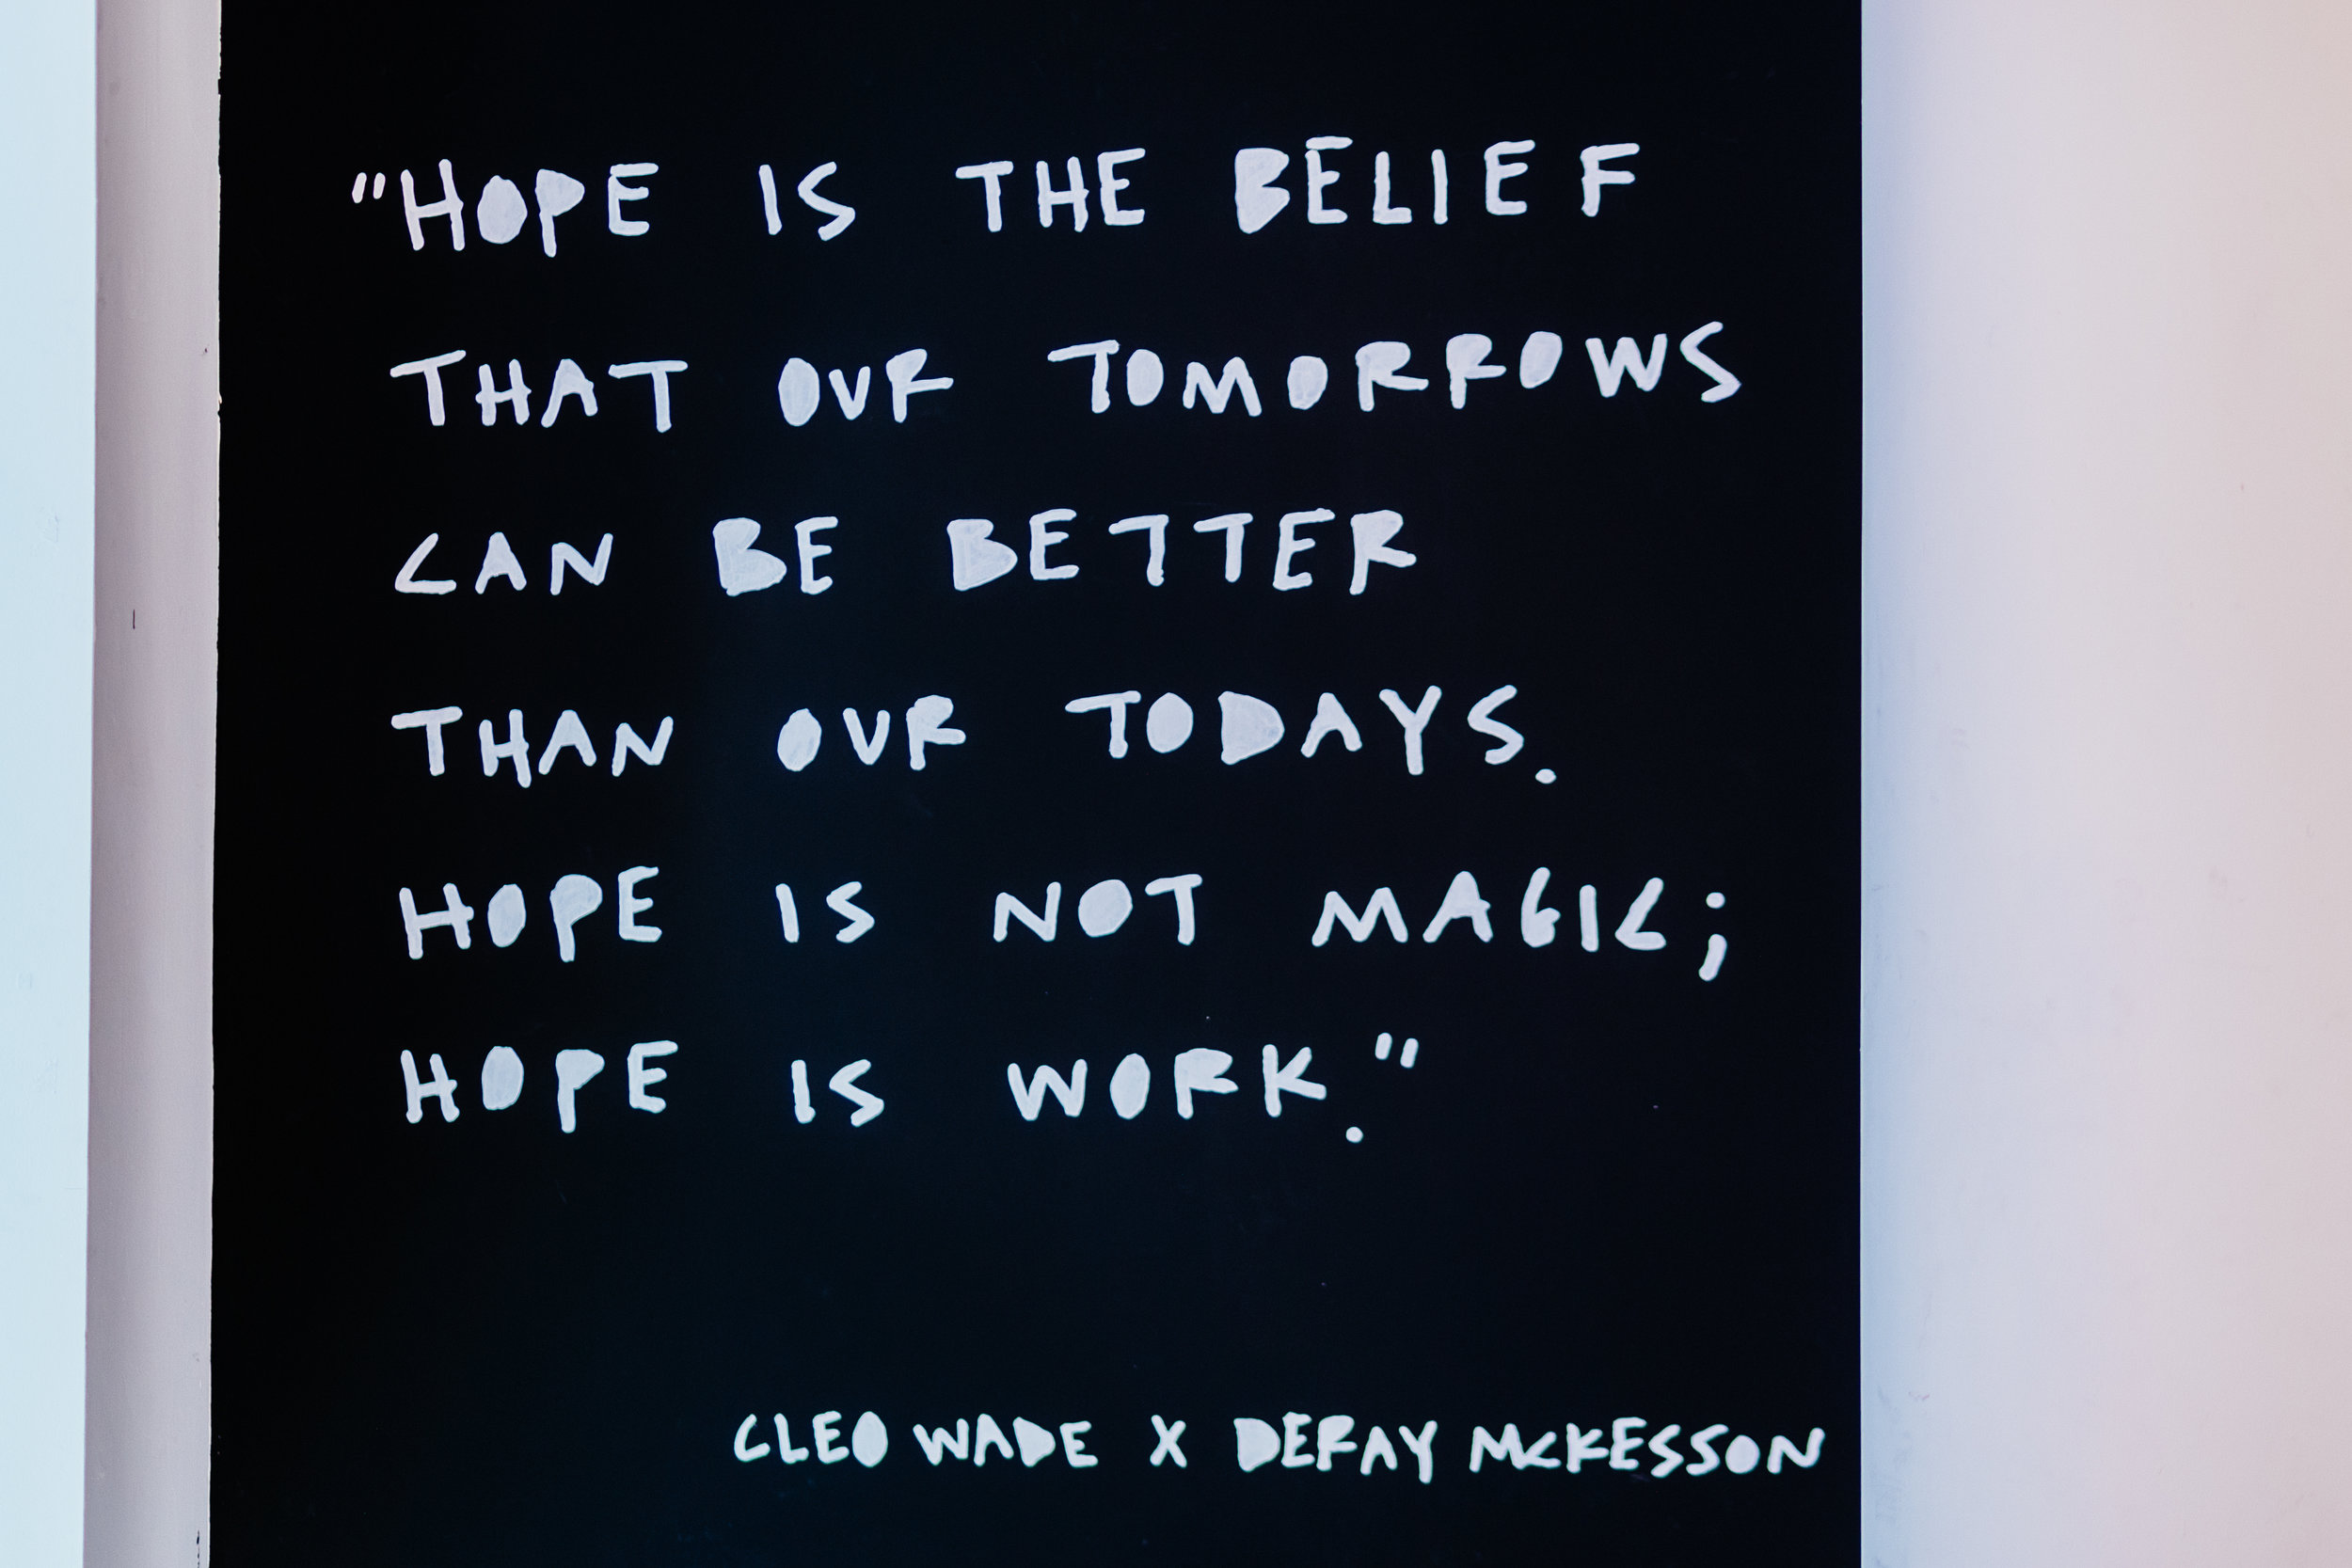 Hope by Cleo Wade and DeRay Mckesson